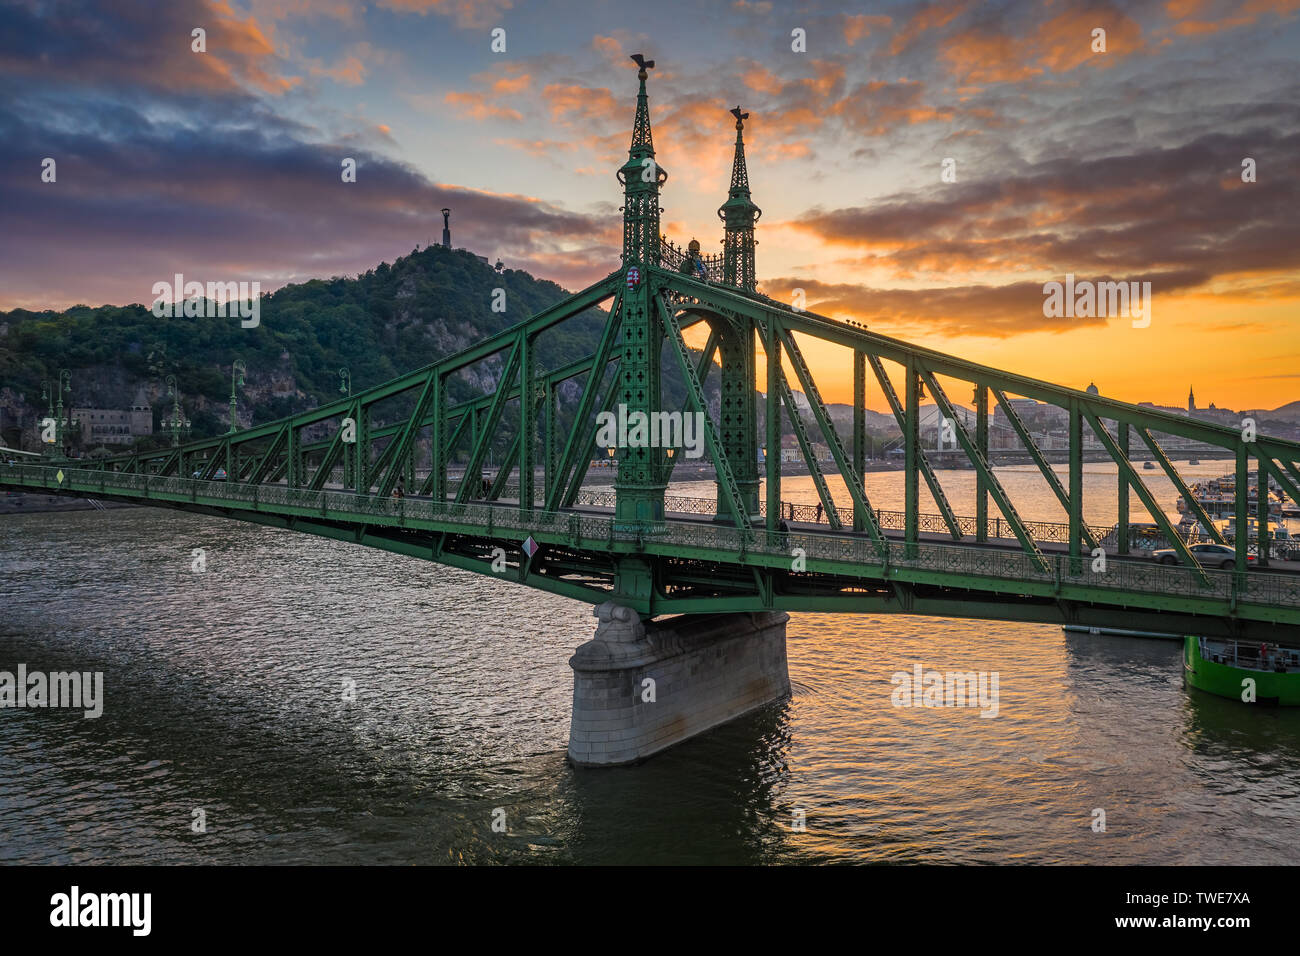 Budapest, Hungary - Beautiful sunset over River Danube with Liberty Bridge, Gellert Hill and Statue of Liberty at background Stock Photo